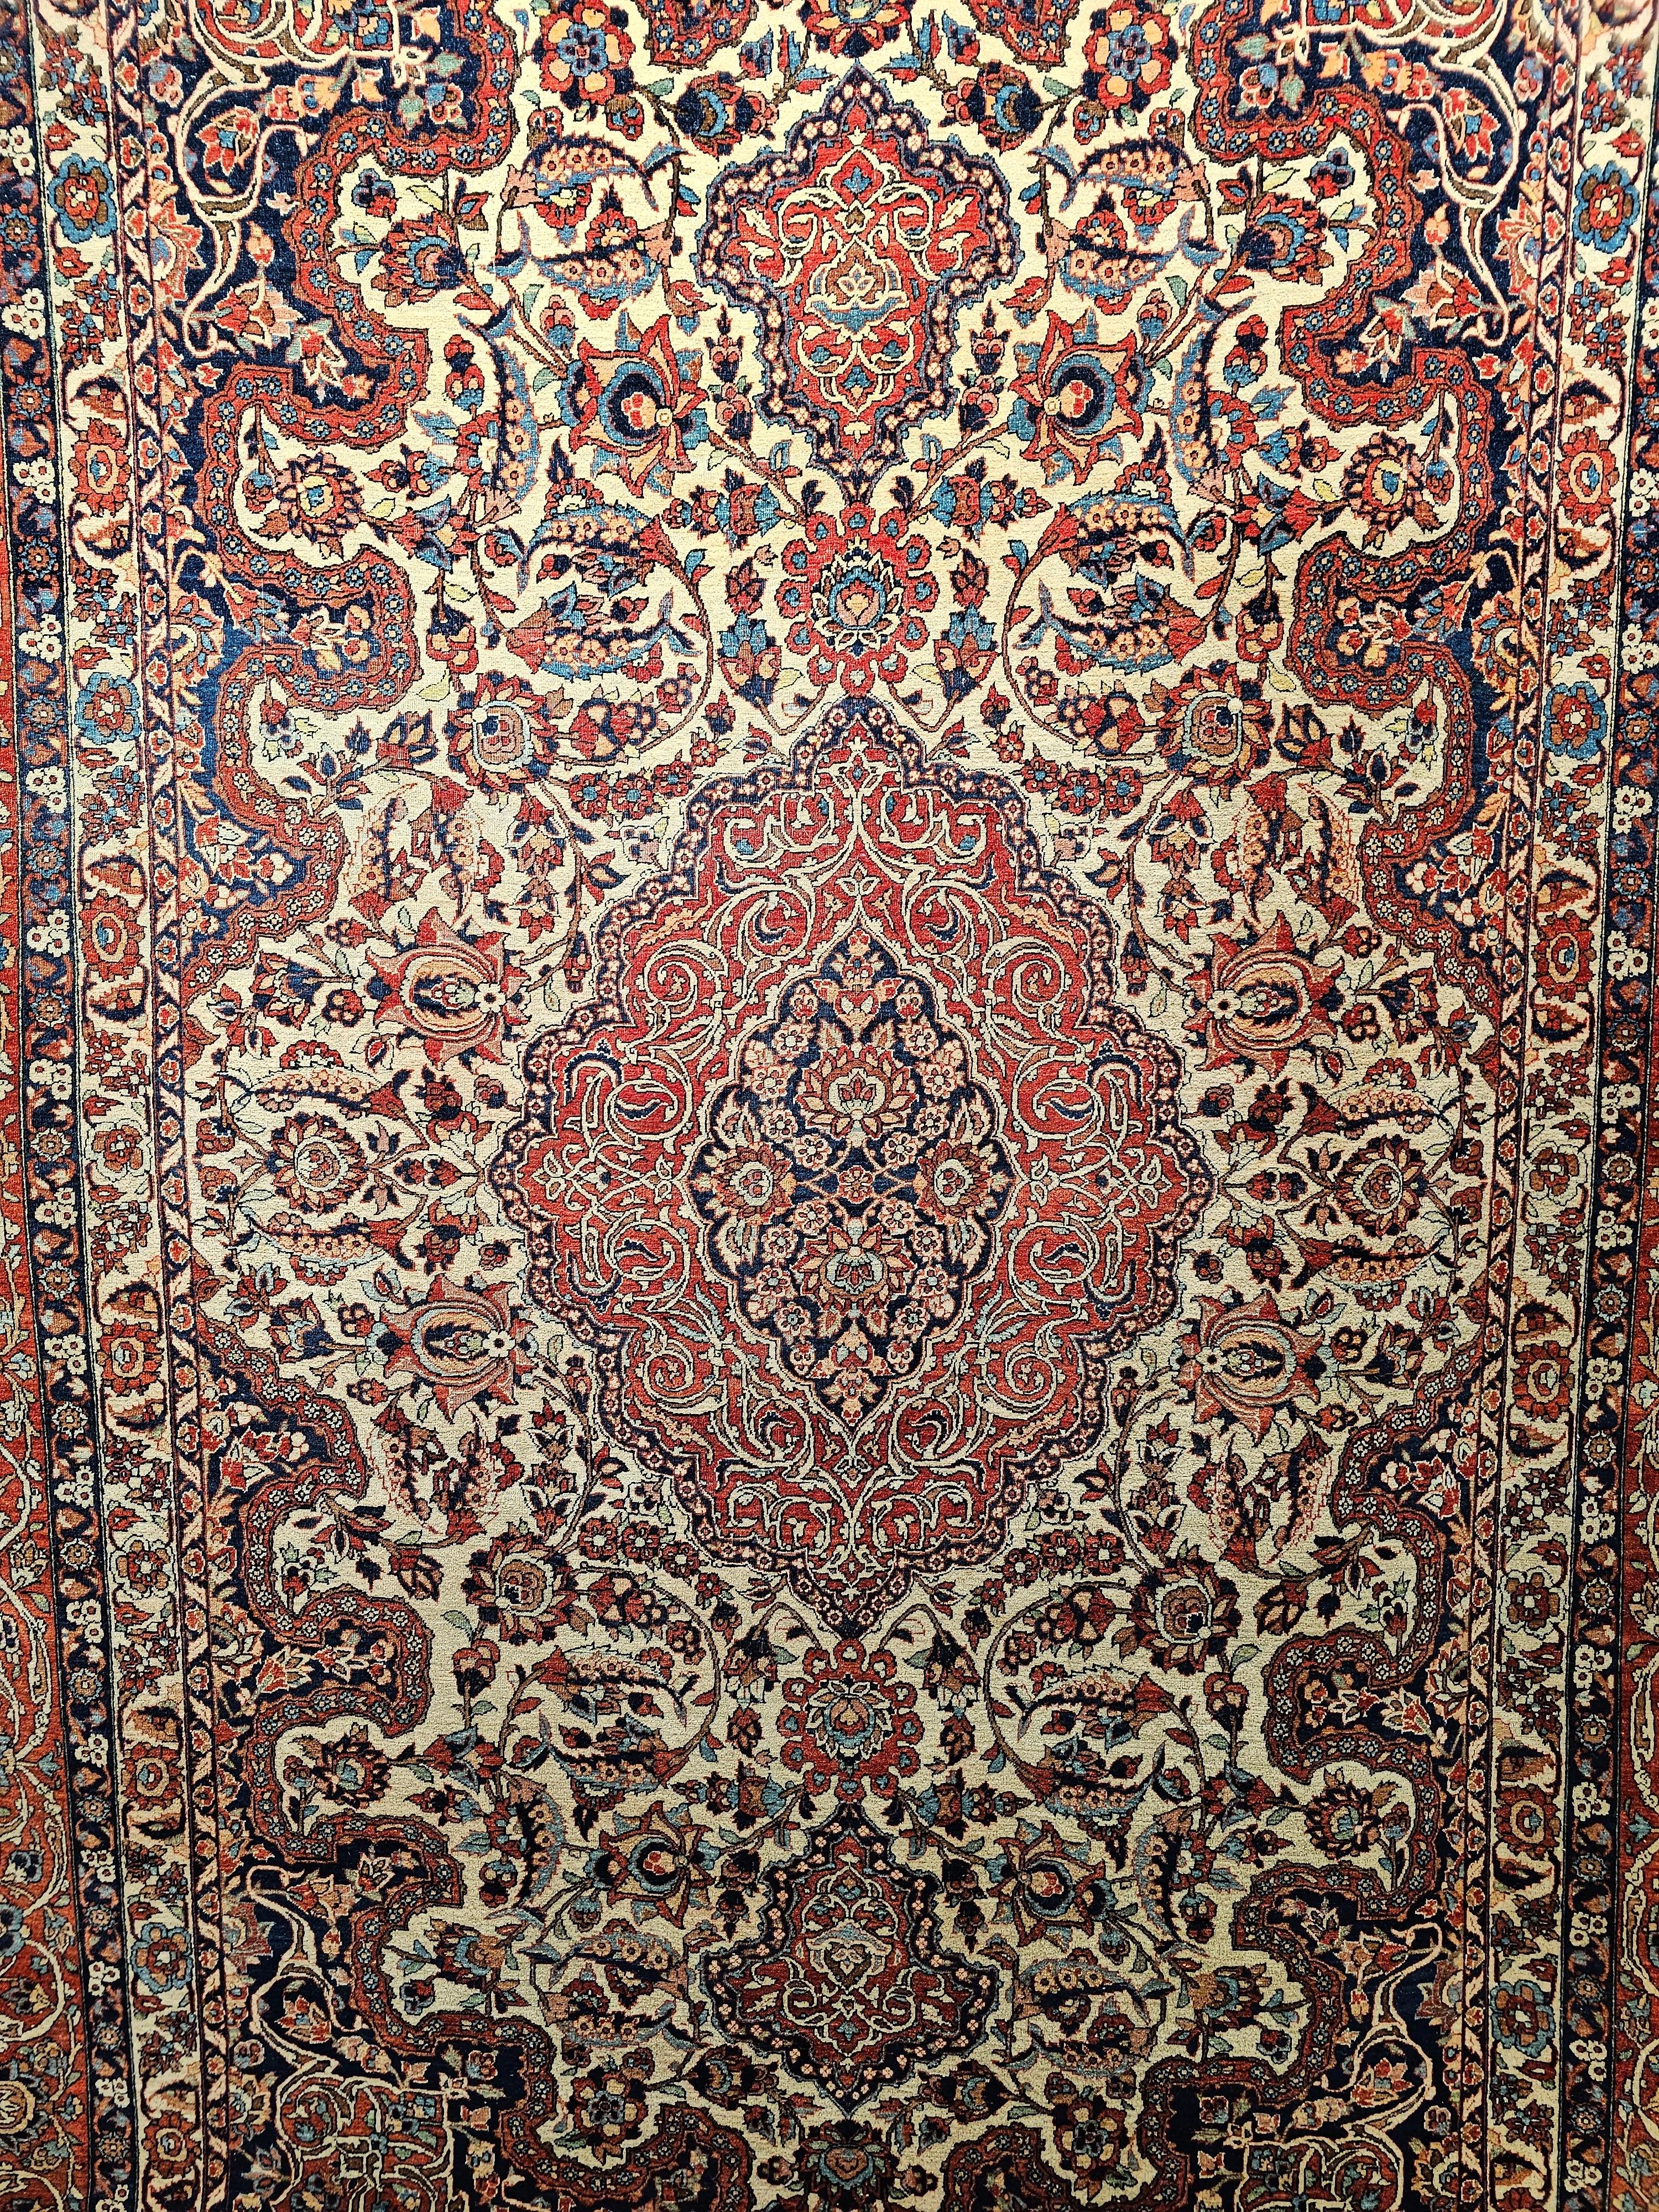 Vintage Persian Isfahan Room Size Rug in Floral Pattern in Ivory, Red, Blue In Good Condition For Sale In Barrington, IL